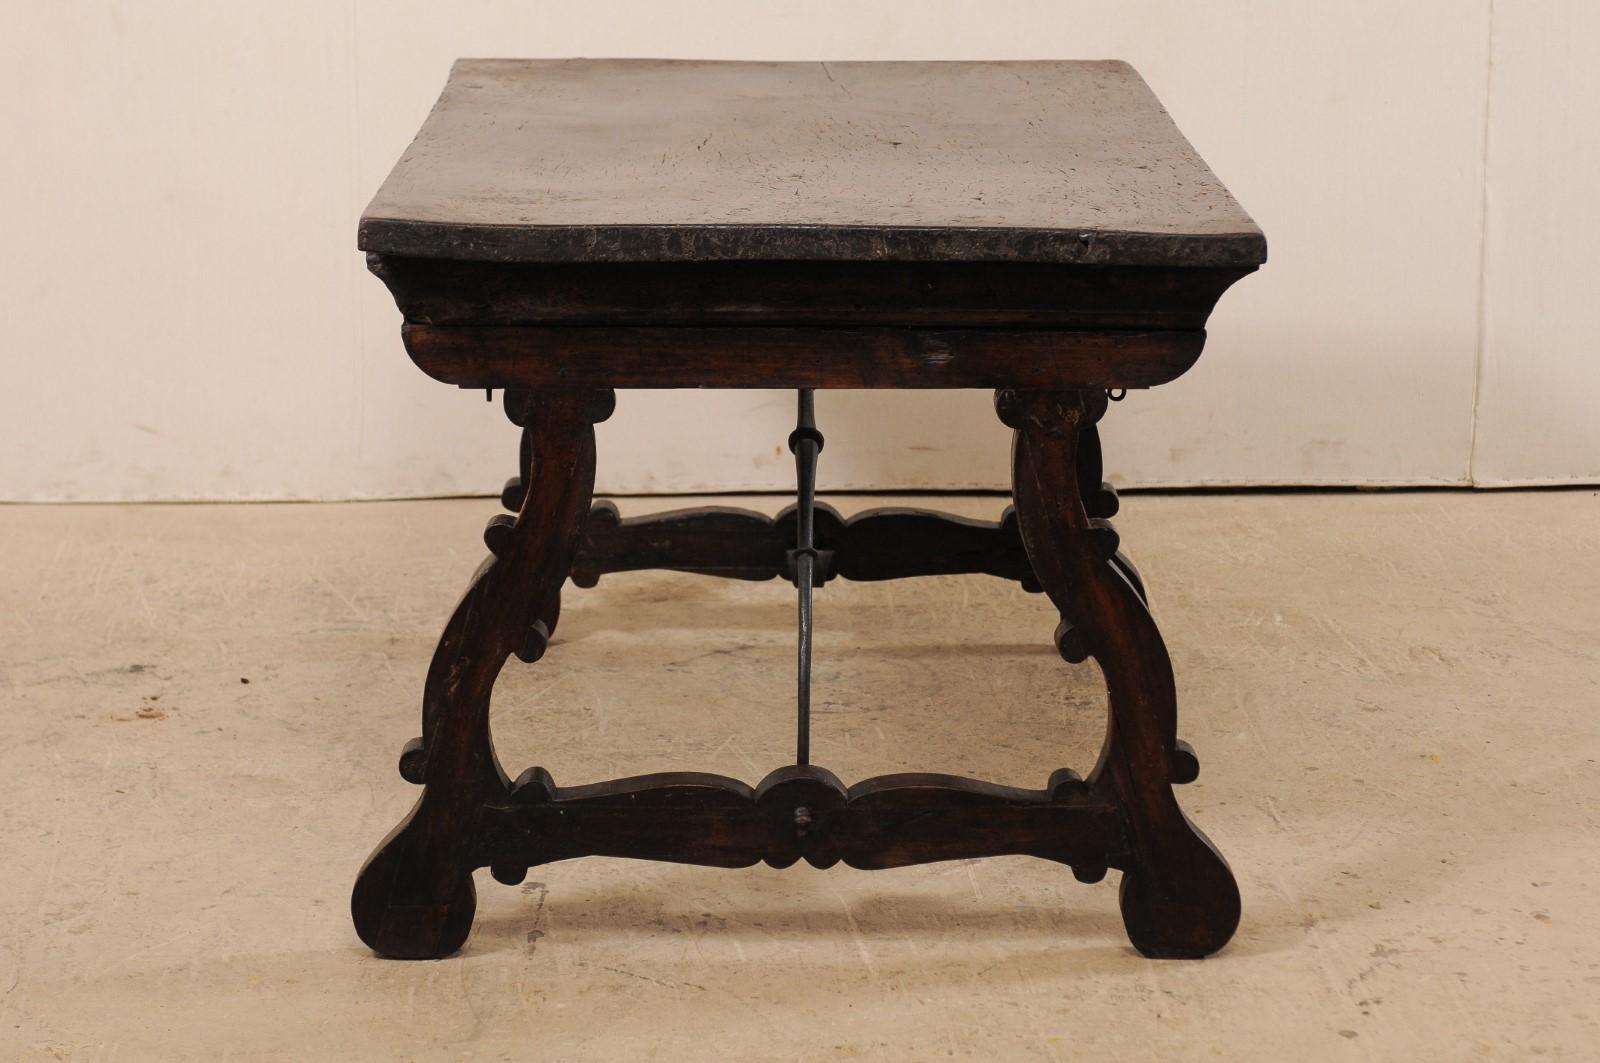 An 18th Century Walnut Wood Trestle Table with Arched Iron Stretcher from Italy 1